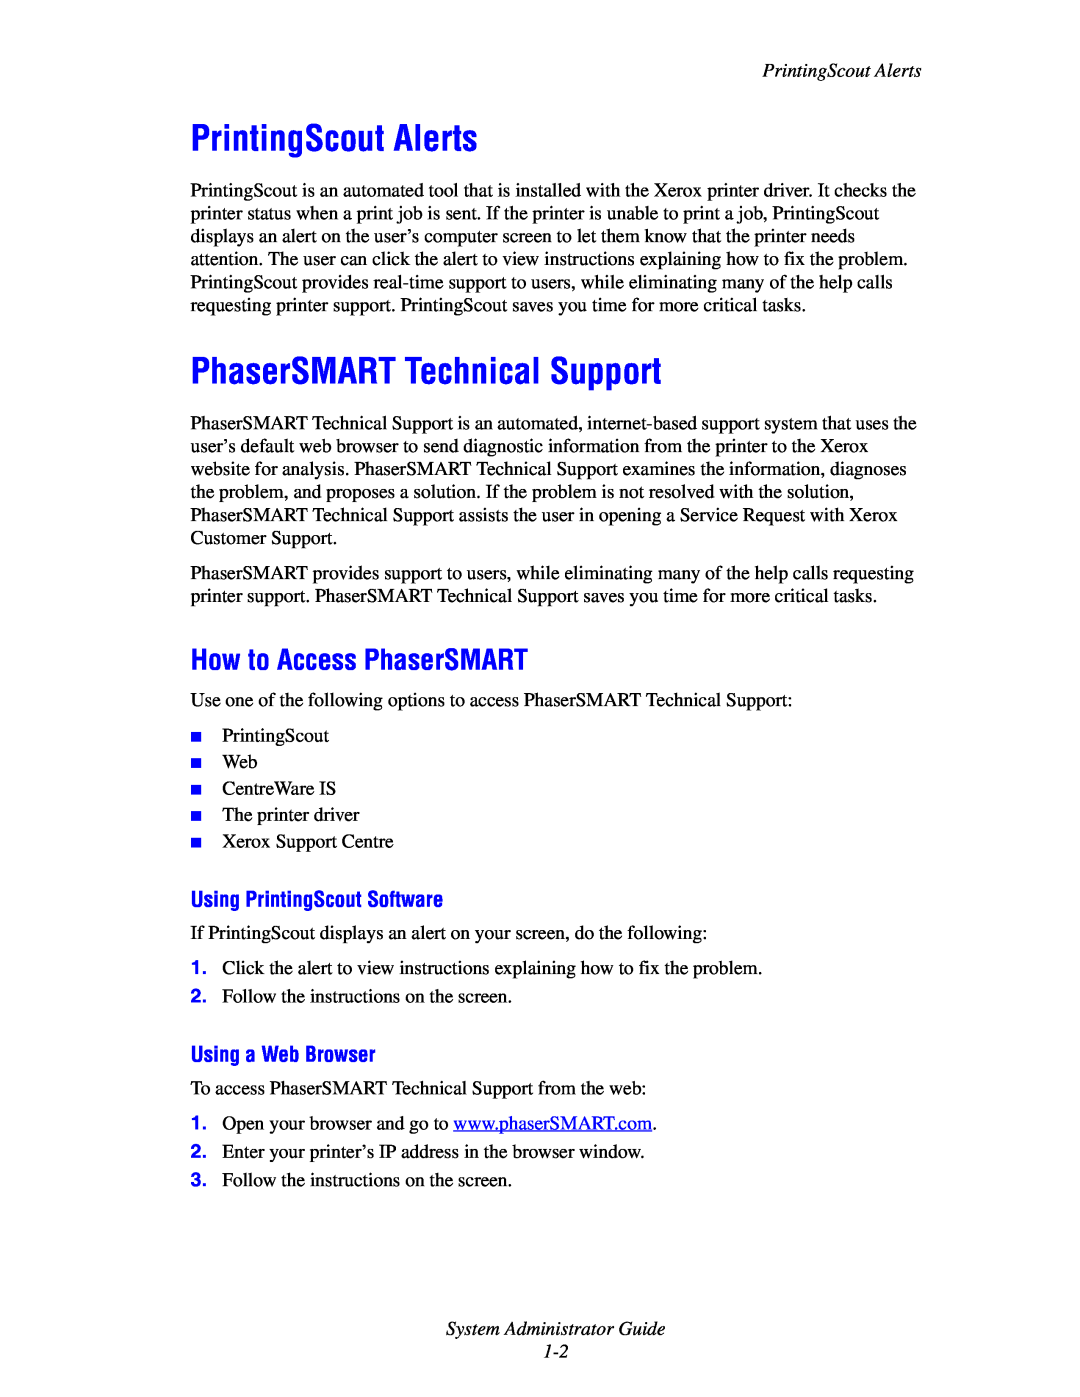 Xerox 1235/DX PrintingScout Alerts, PhaserSMART Technical Support, How to Access PhaserSMART, Using PrintingScout Software 